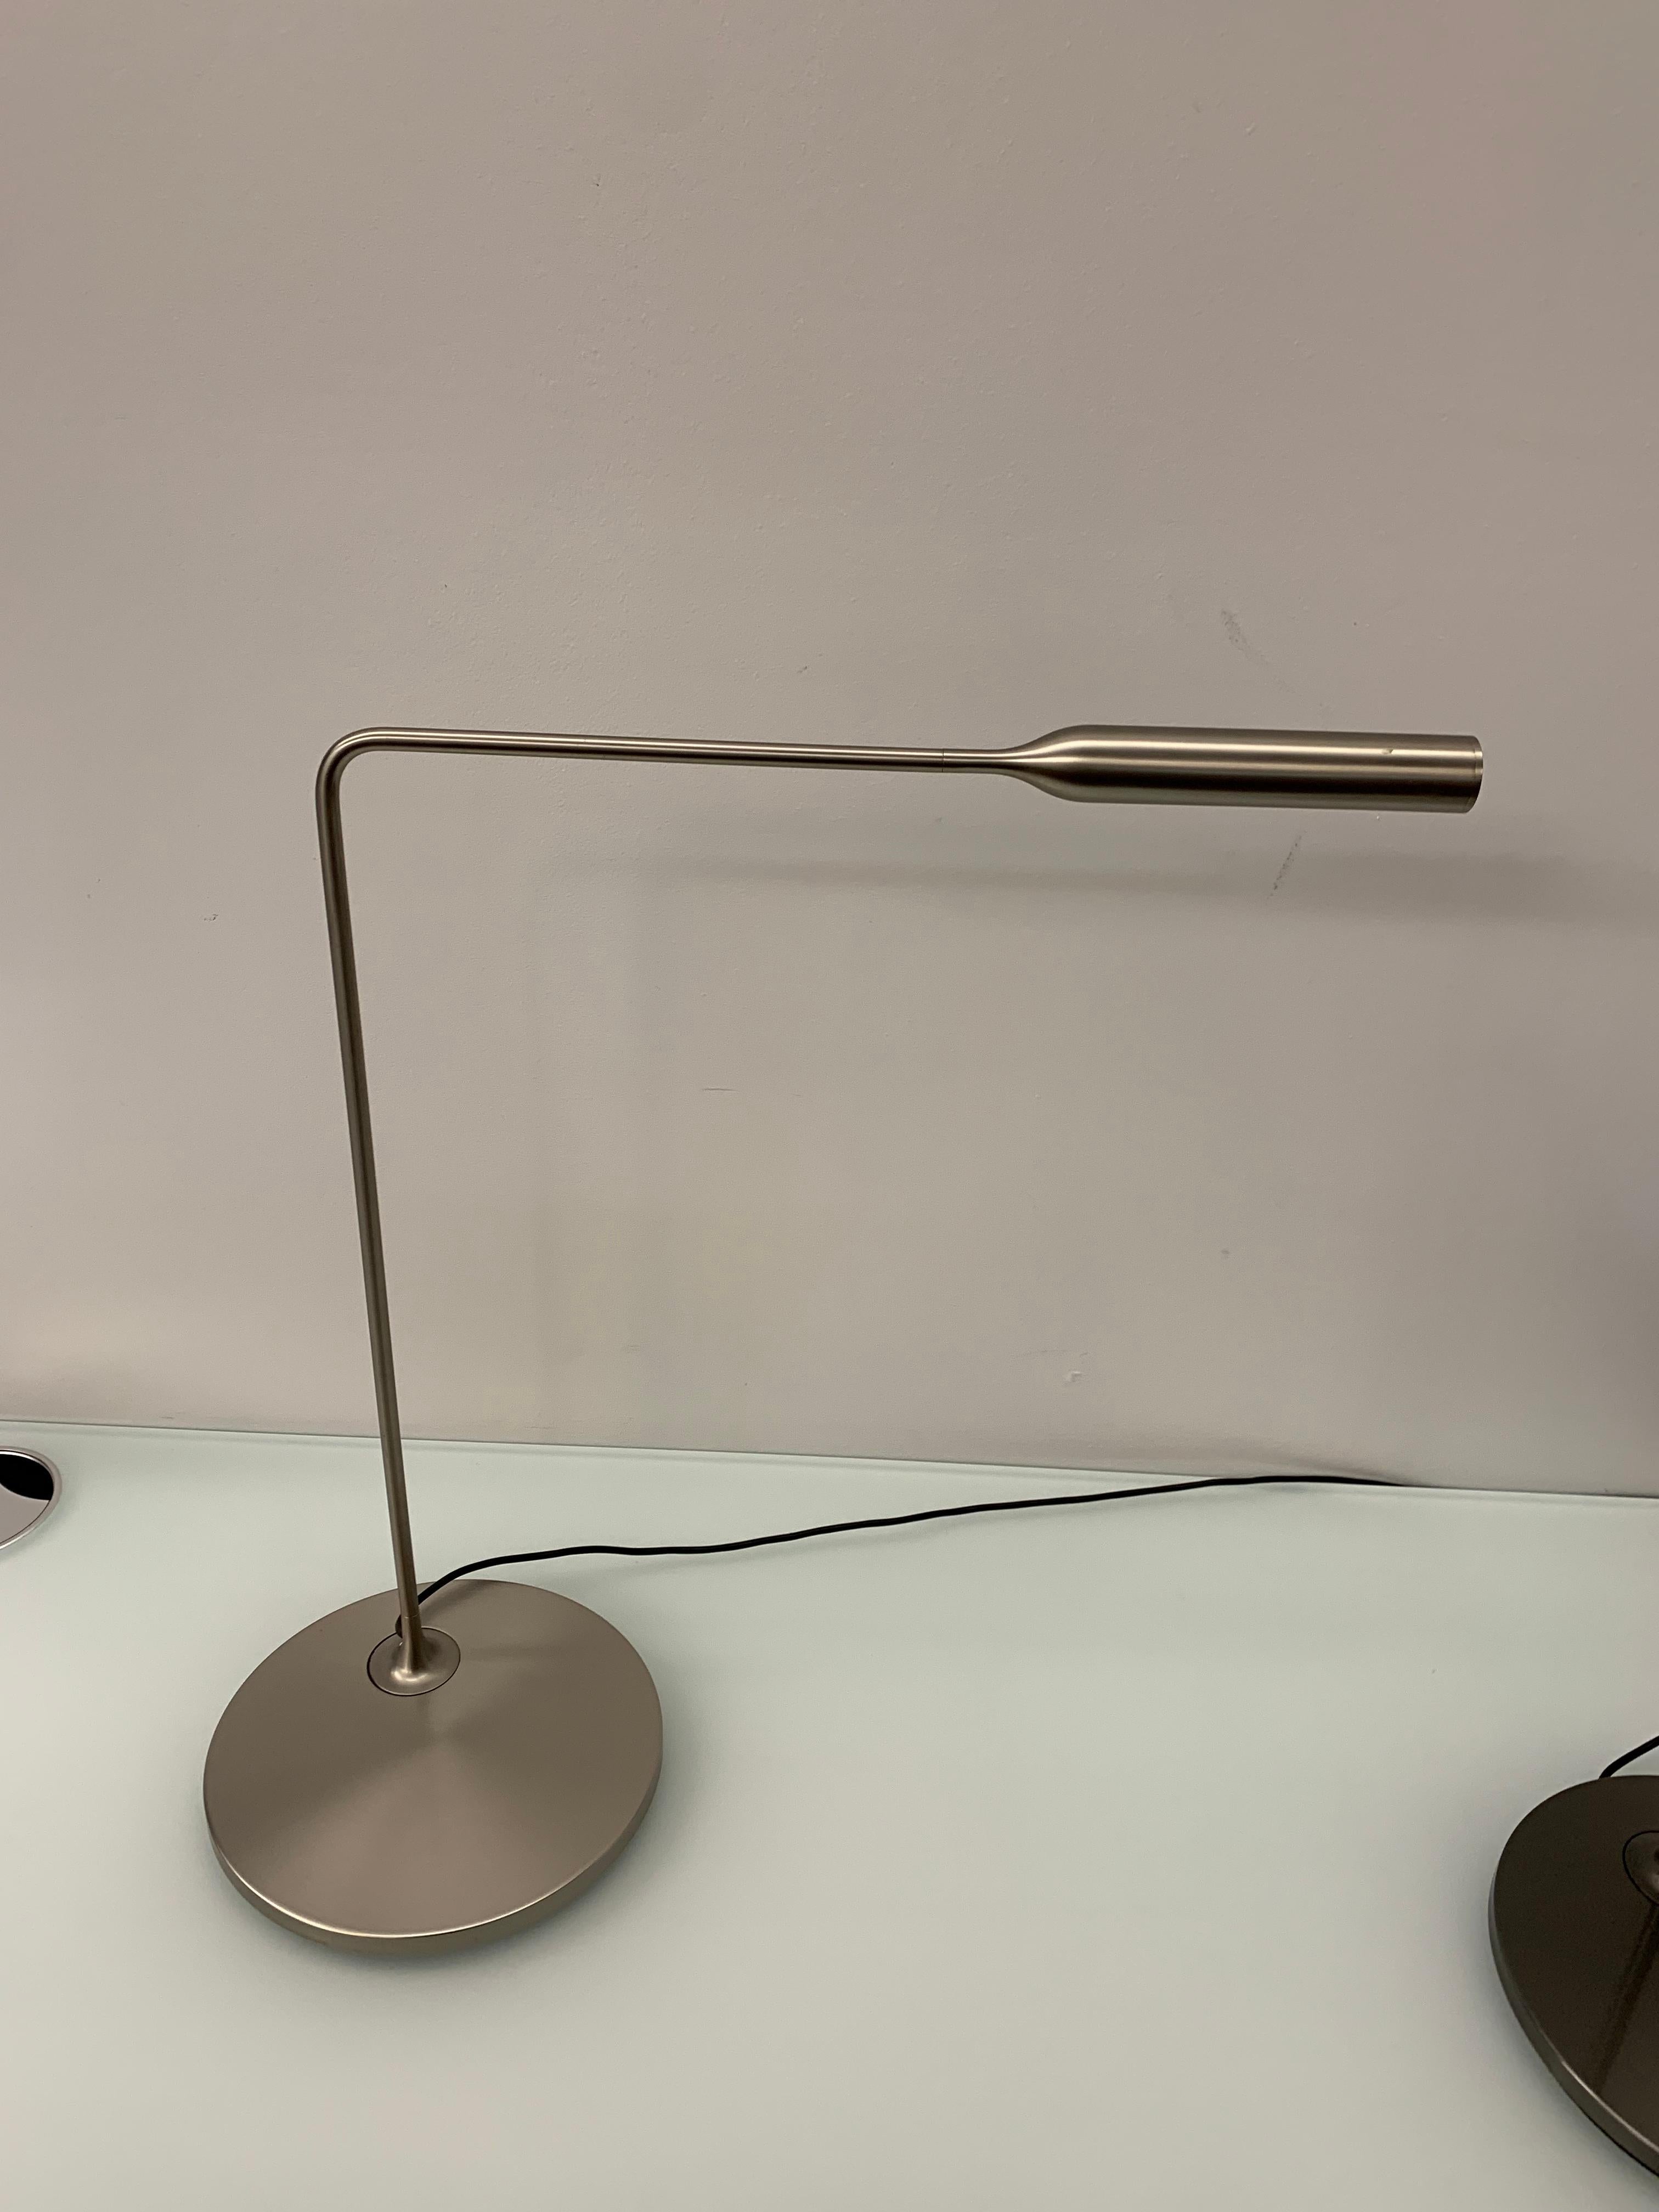 Flo desk
Foster + Partners
Task LED light in varnish coated aluminium and steel. Its head rotates by 300° for direct lighting, the arm pivots on base by 120°. 6W LED which you can switch on with one click for full light intensity, with two clicks